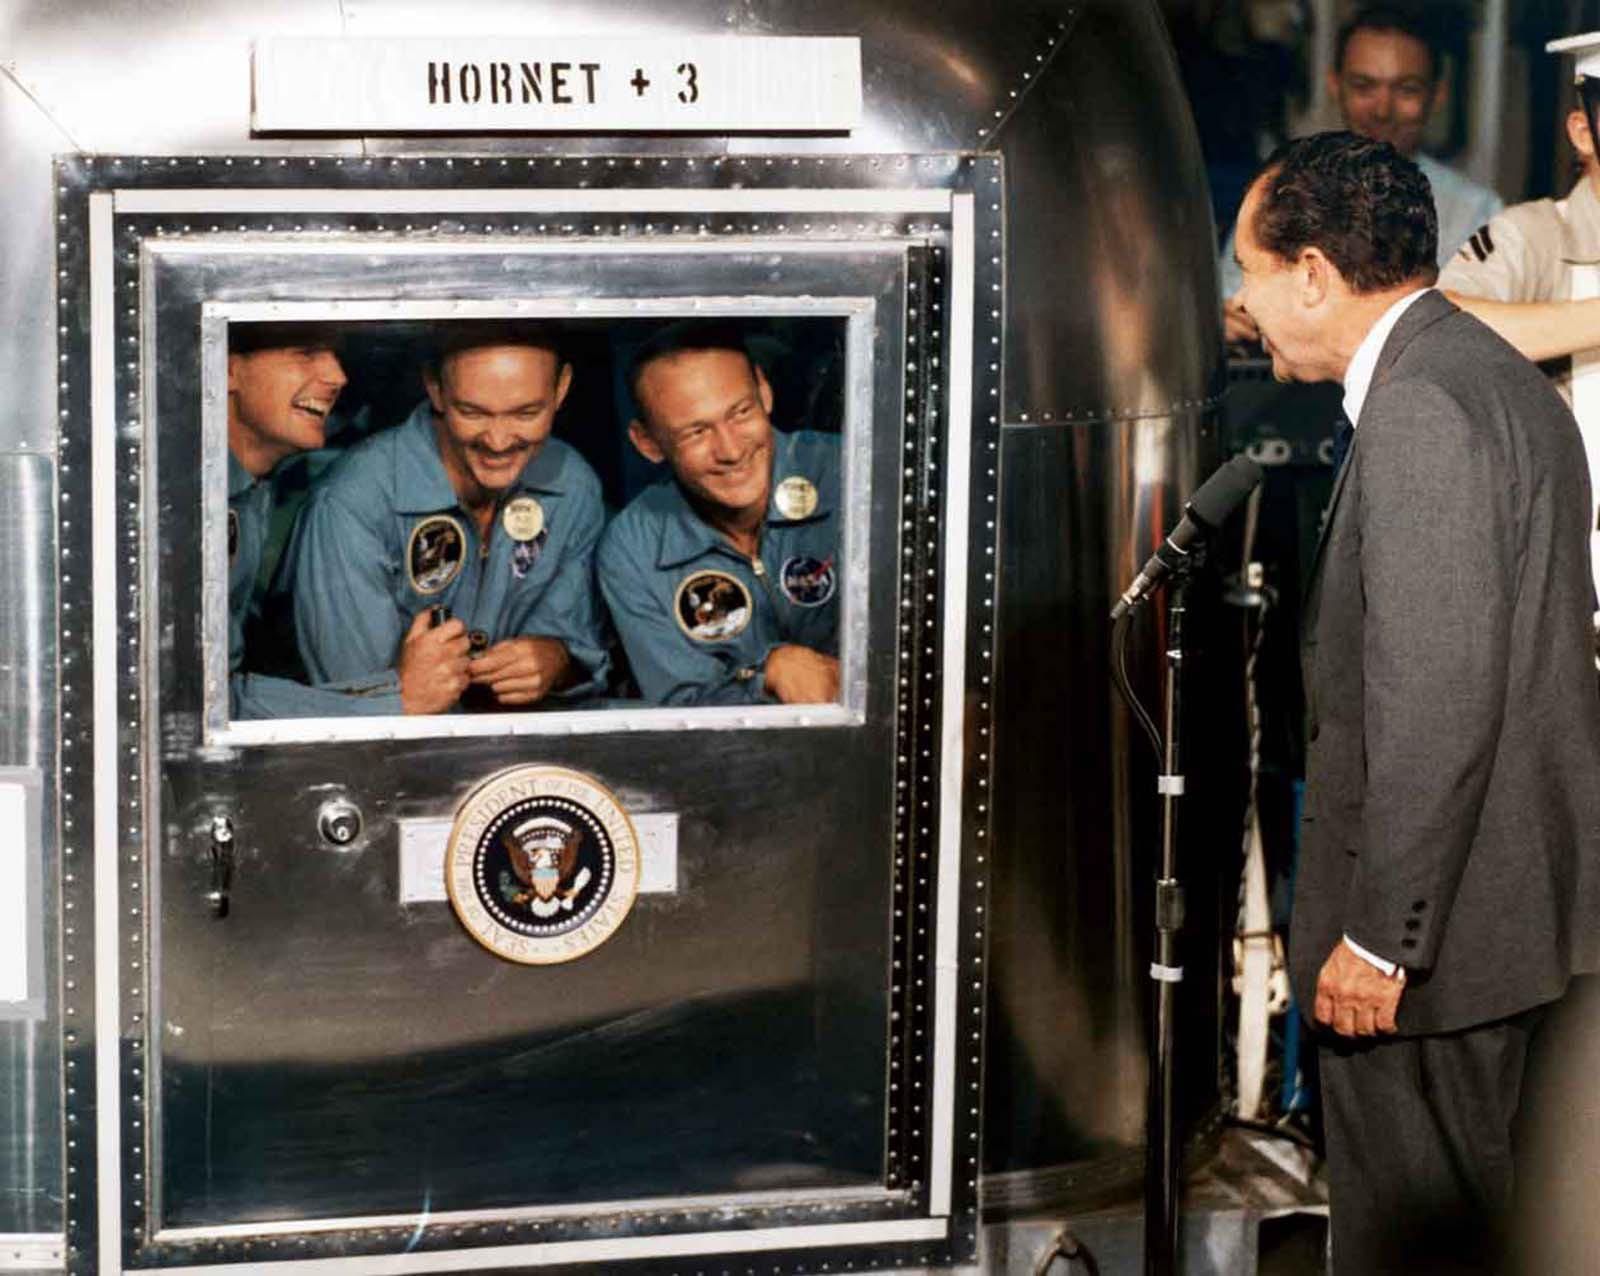 Apollo 11 astronauts in Quarantine after catching Covid on the Moon,